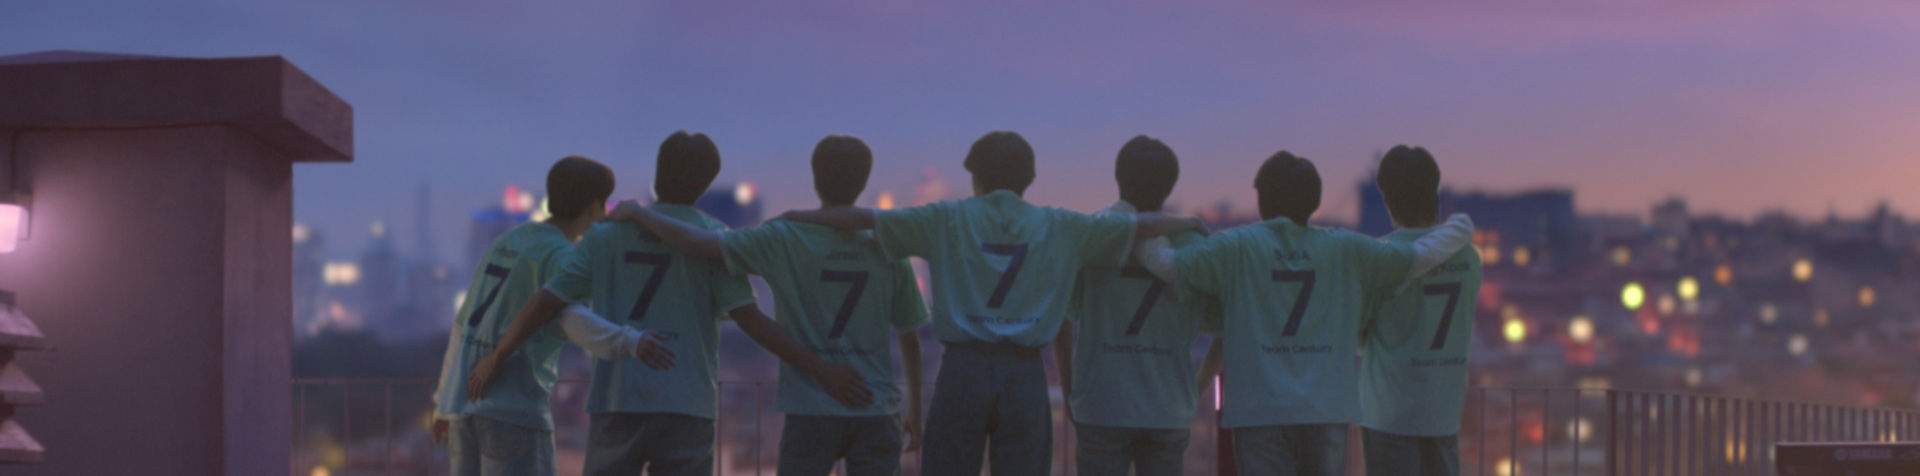 All 7 members of BTS standing on a rooftop at dusk with their backs to the camera. They are all wearing their Goal of the Century jerseys with the number 7 and BTS written on the back. 